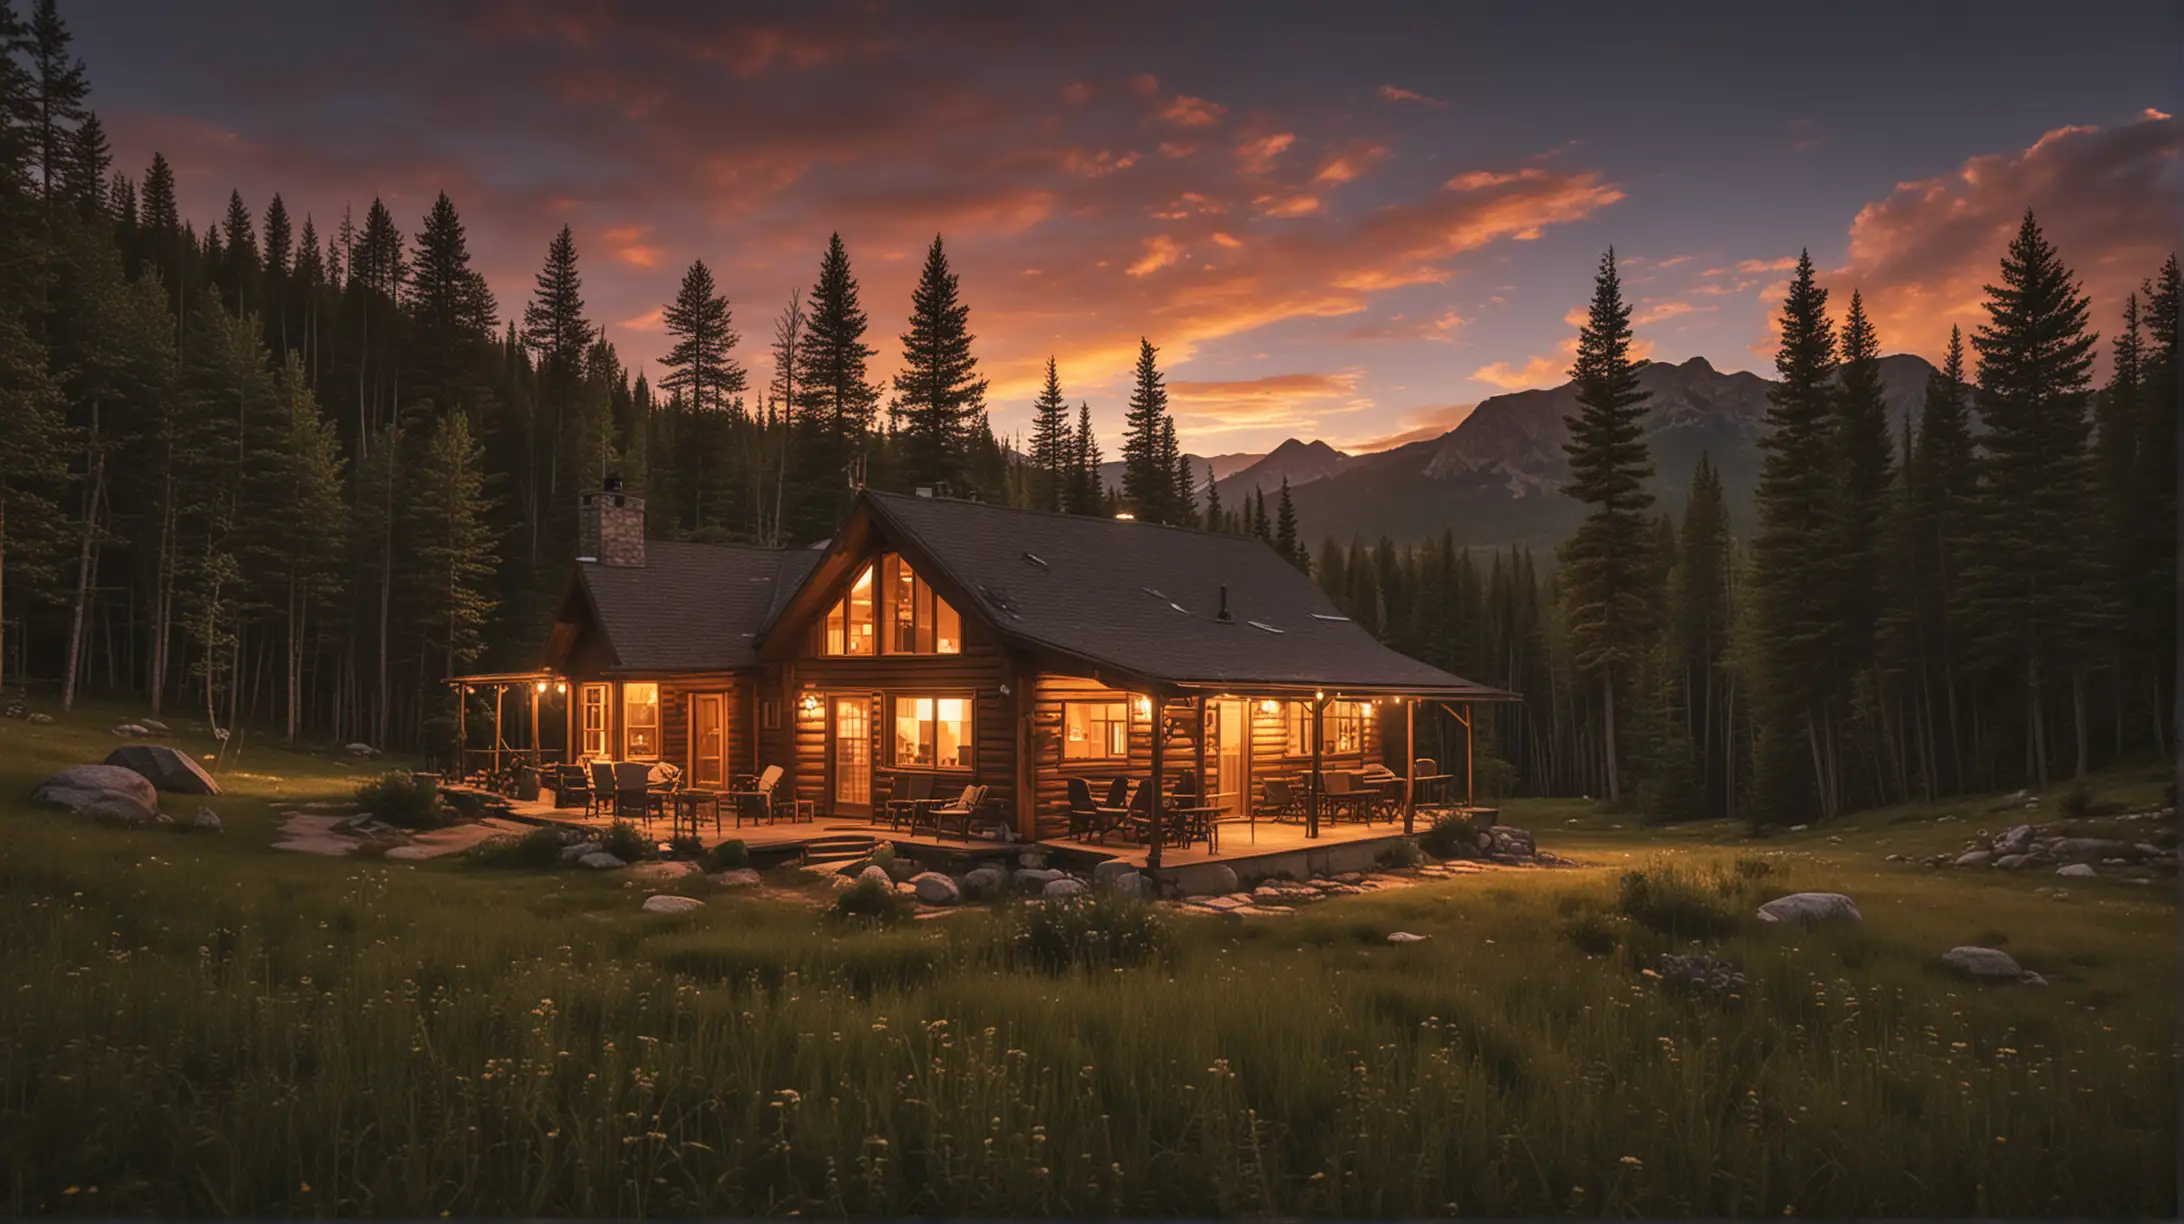 Serene Mountain Cabin with Soft Sunset Glow in Summer